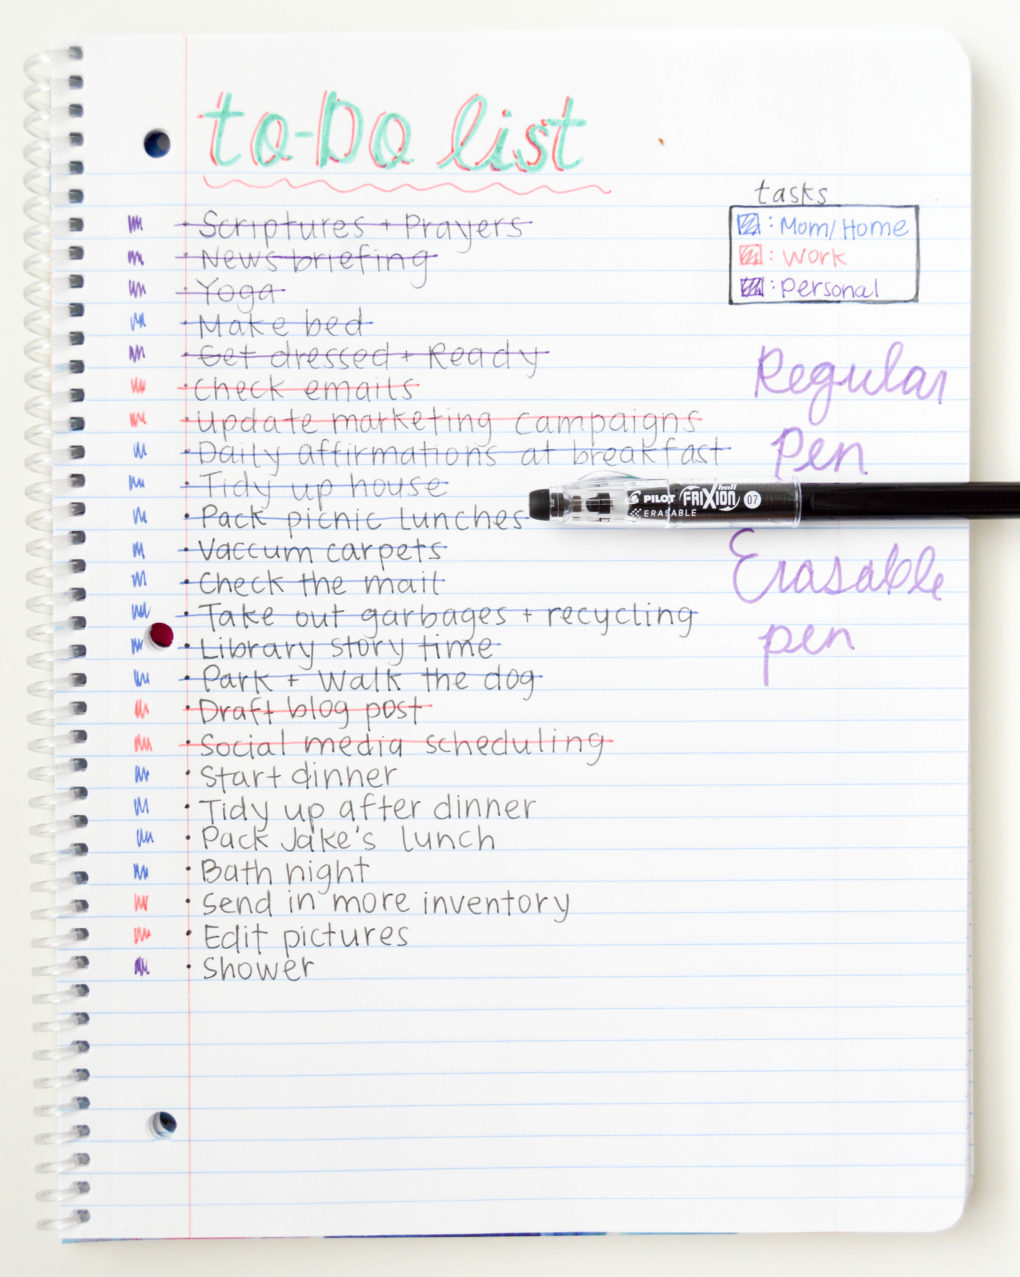 To Do List example | Organize your day with 5 to-do list tips. Making a to-do list that will help you with long-term goals, motivate you, + make accomplishing tasks more fun. | DIY daily organization ideas and creative ways to maximize your notebook or planner.